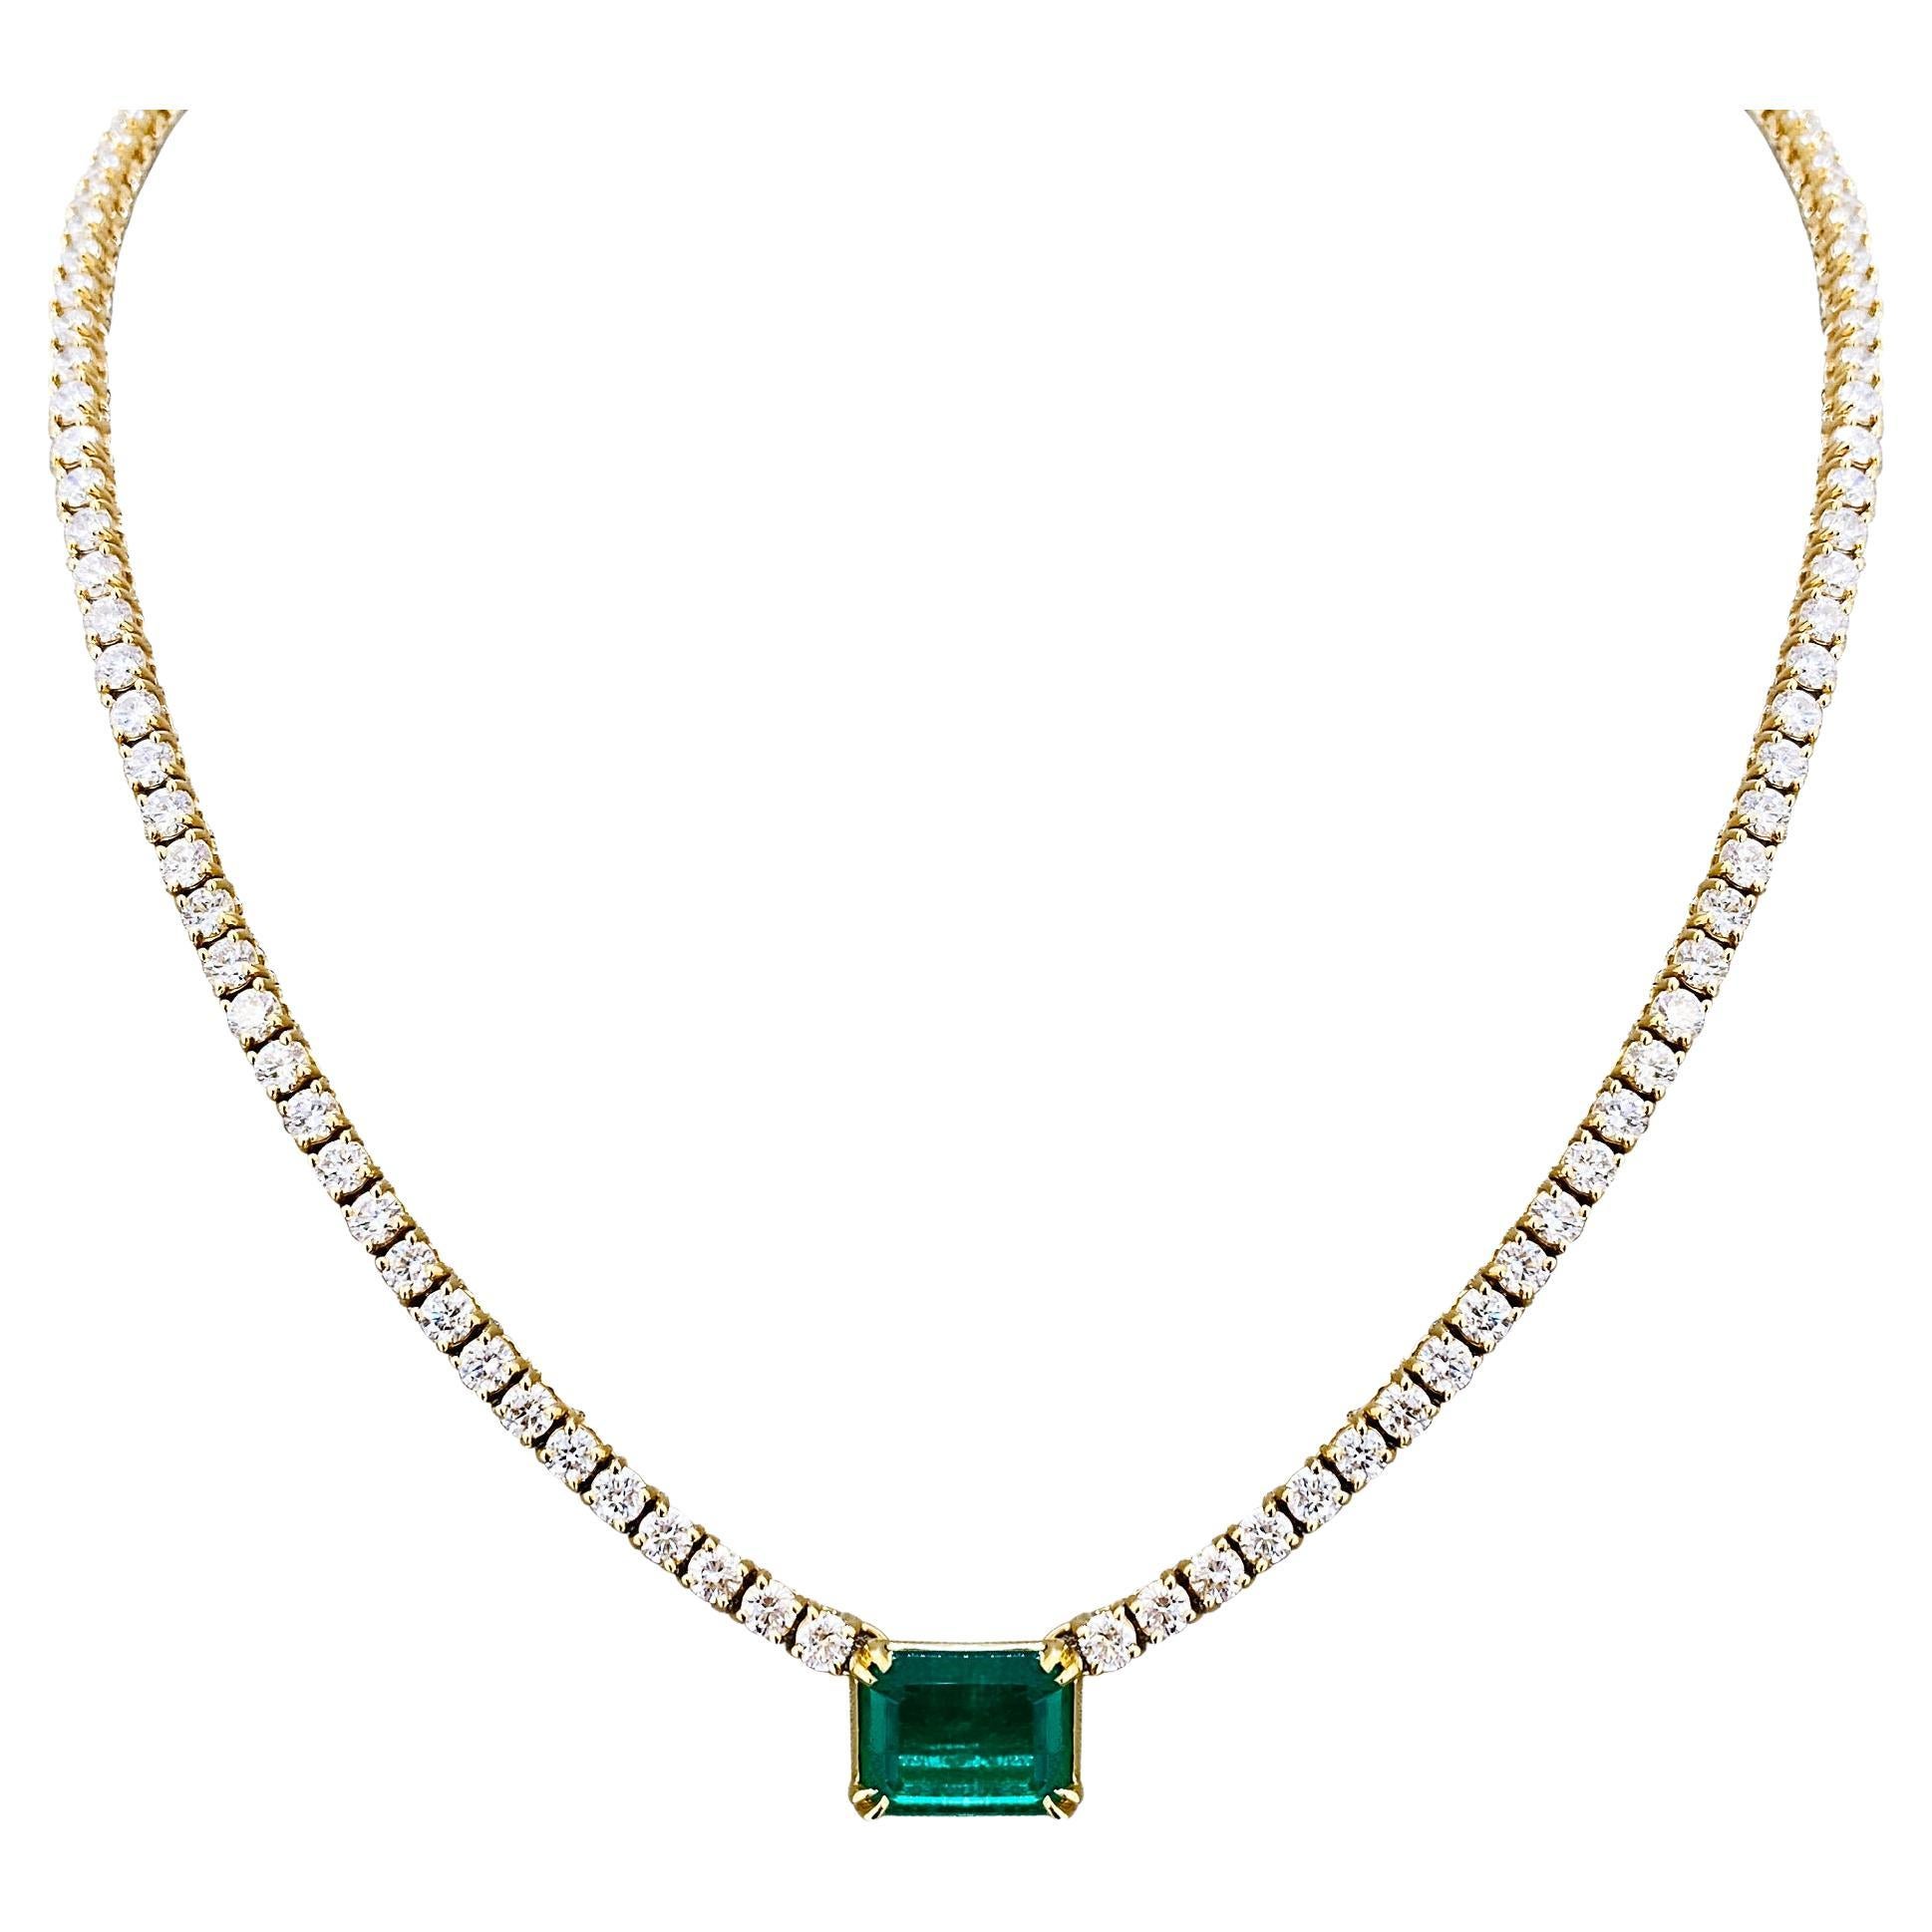 Emerald and Diamond Tennis Necklace in 18K Yellow Gold